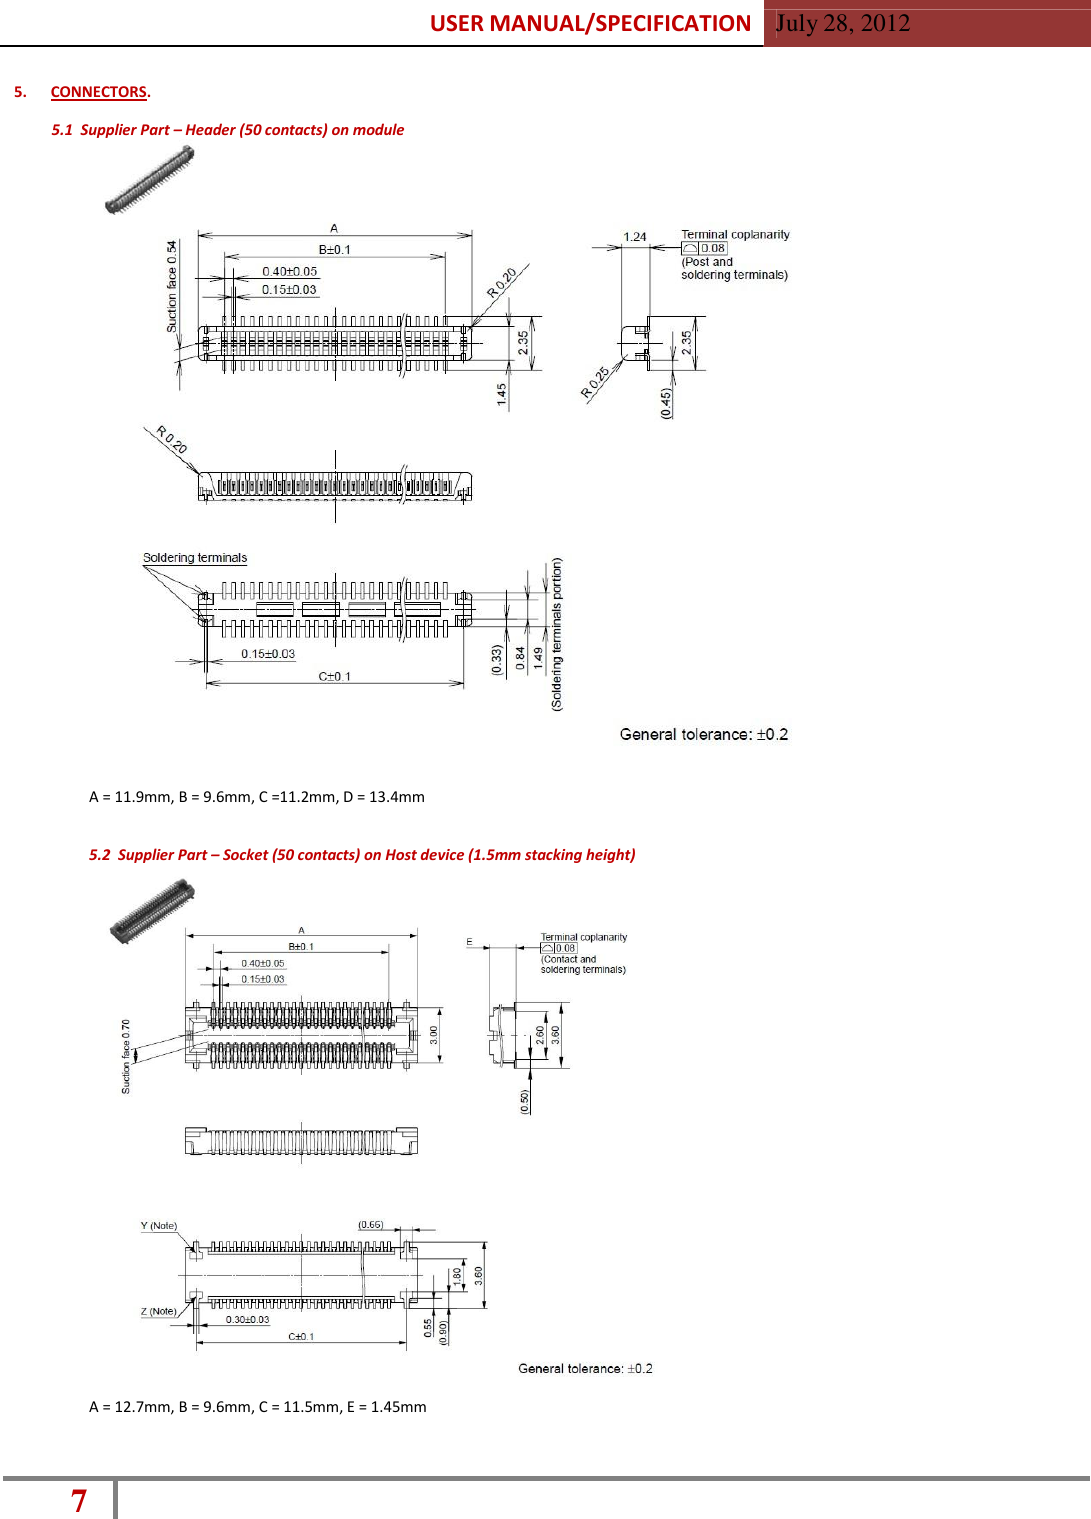 USER MANUAL/SPECIFICATION  July 28, 2012 7    5. CONNECTORS.  5.1  Supplier Part – Header (50 contacts) on module   A = 11.9mm, B = 9.6mm, C =11.2mm, D = 13.4mm   5.2  Supplier Part – Socket (50 contacts) on Host device (1.5mm stacking height)   A = 12.7mm, B = 9.6mm, C = 11.5mm, E = 1.45mm 